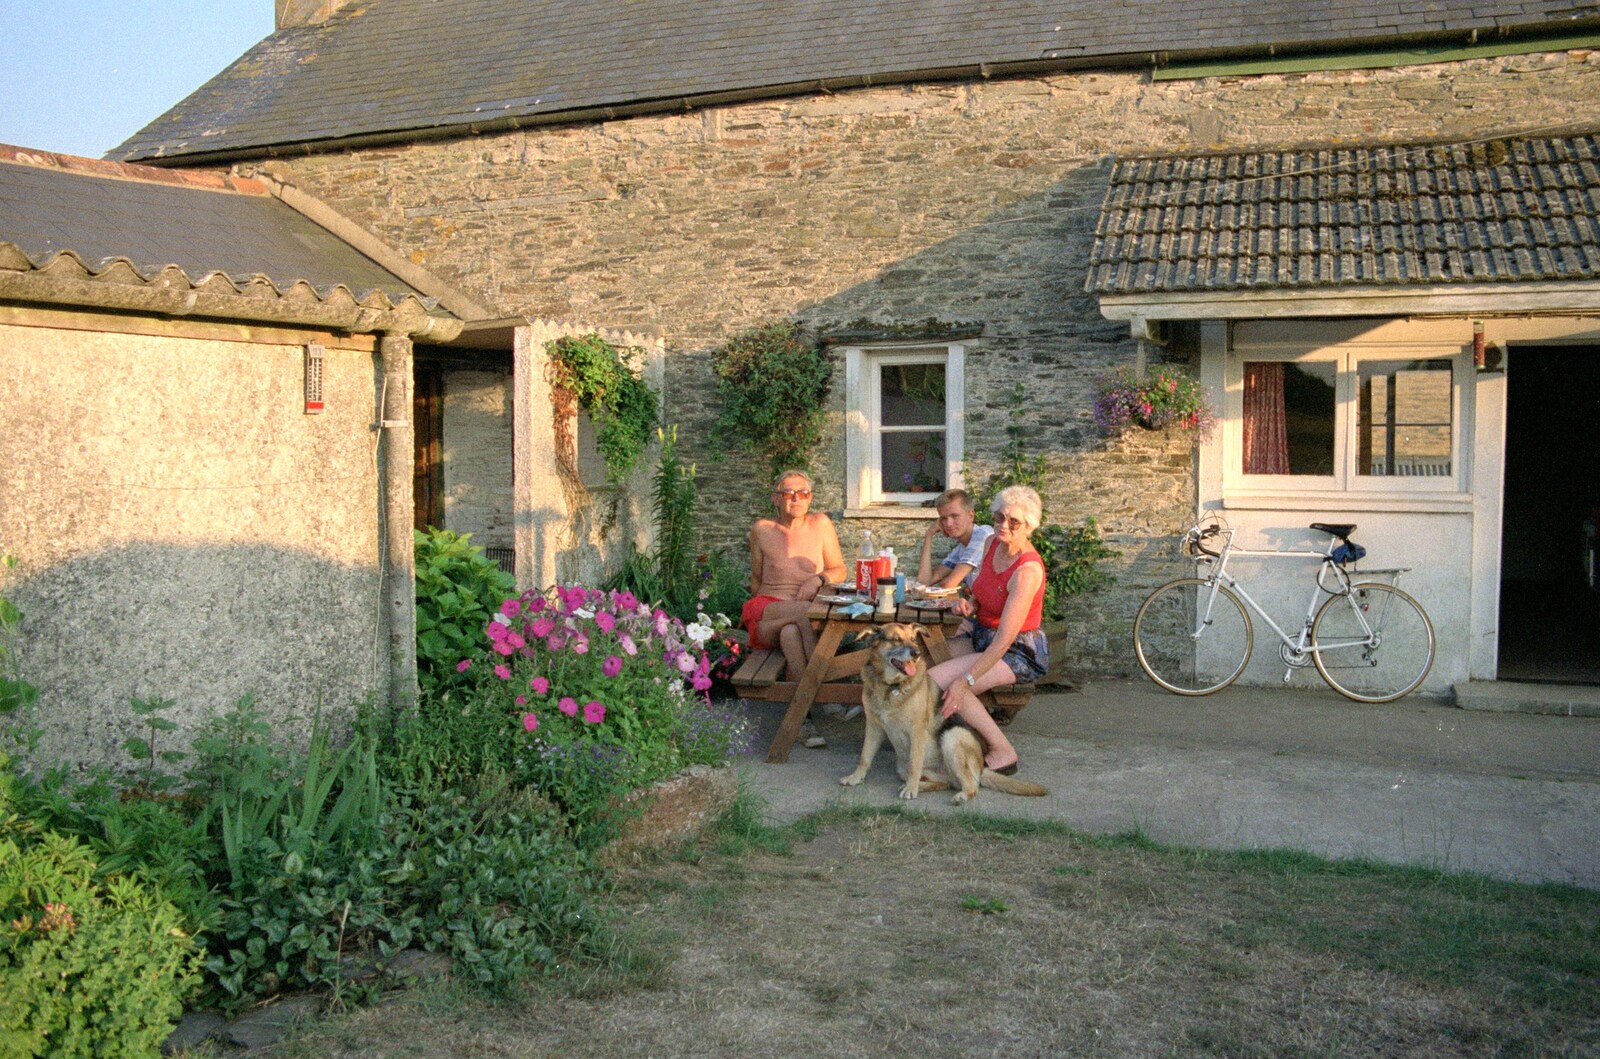 Bill, Nosher, Diana and Marty sit outside from Summer Days on Pitt Farm, Harbertonford, Devon - 17th July 1989